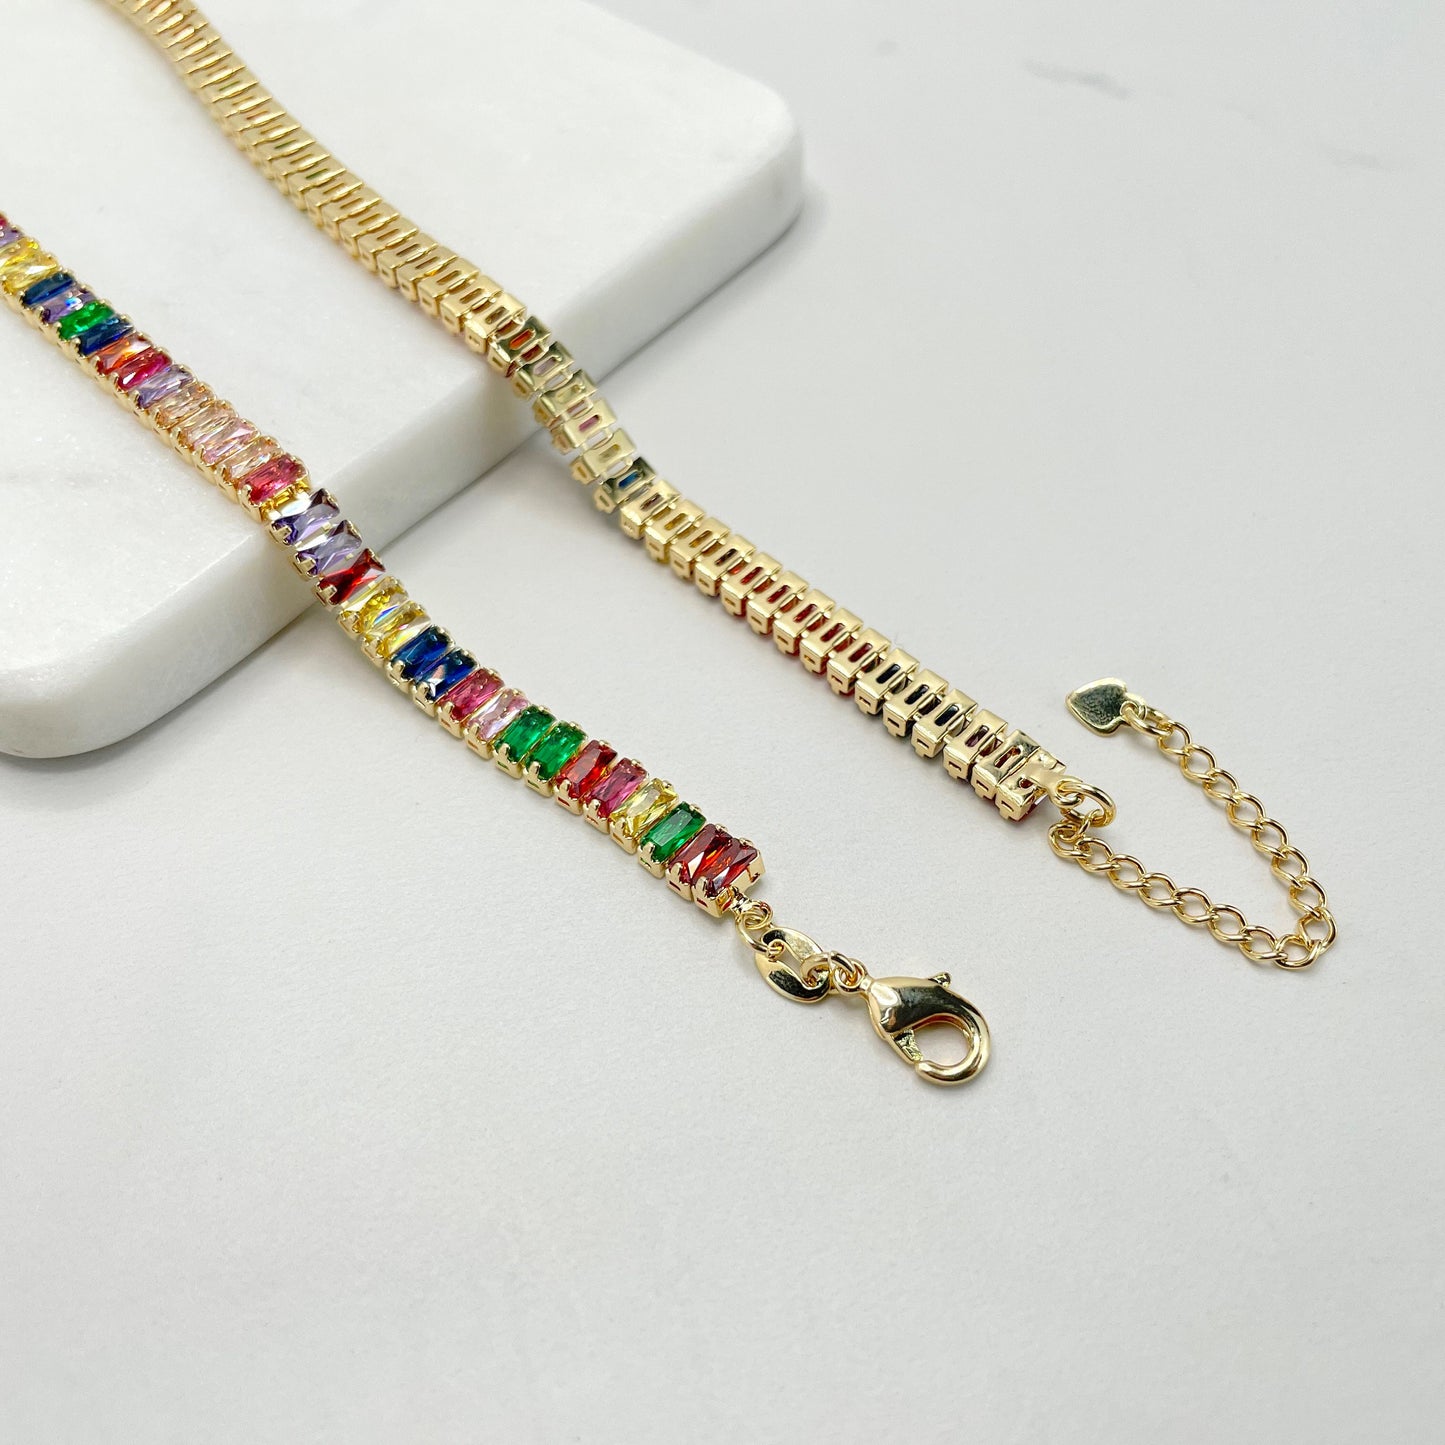 18k Gold Filled Fancy Rainbow Choker or Bracelet Featuring High Quality Colorful Cubic Zirconia Wholesale Jewelry Supplies